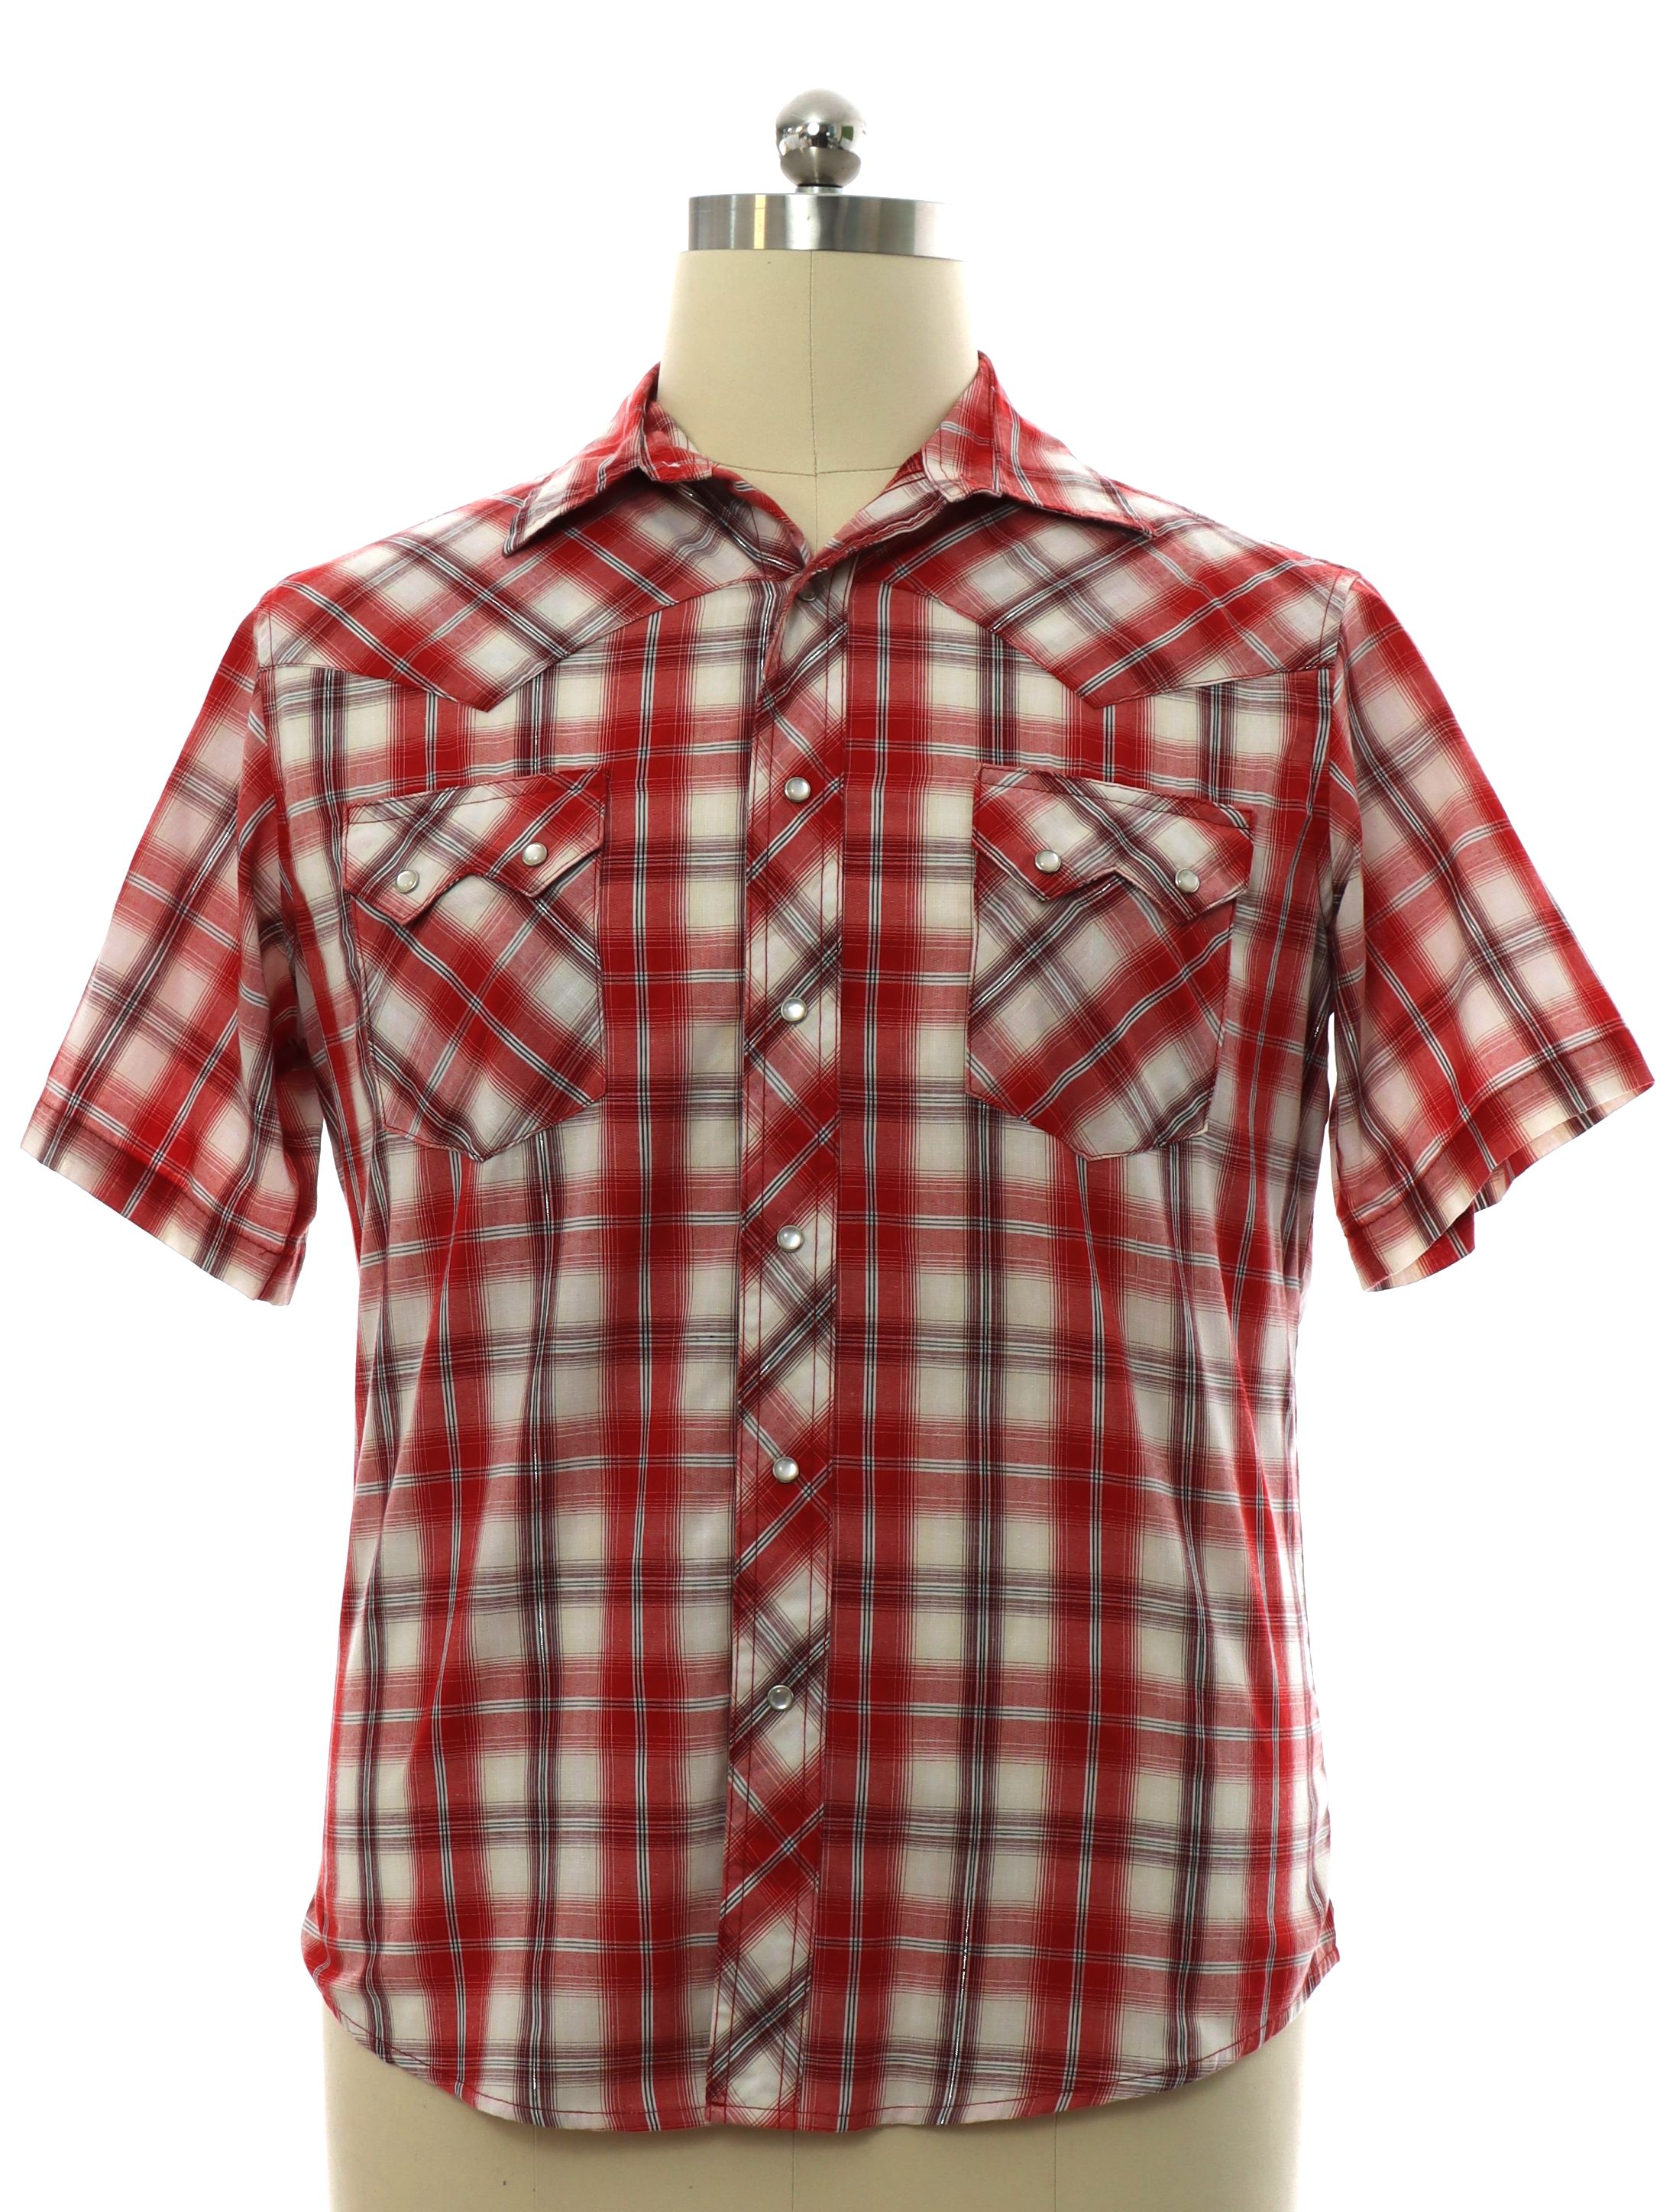 Western Shirt: 90s -Wrangler- Mens red, off white, and silver lurex plaid  polyester cotton blend short sleeve western shirt. (Made in Bangladesh)  snap front. Fold over collar, front and back Western style